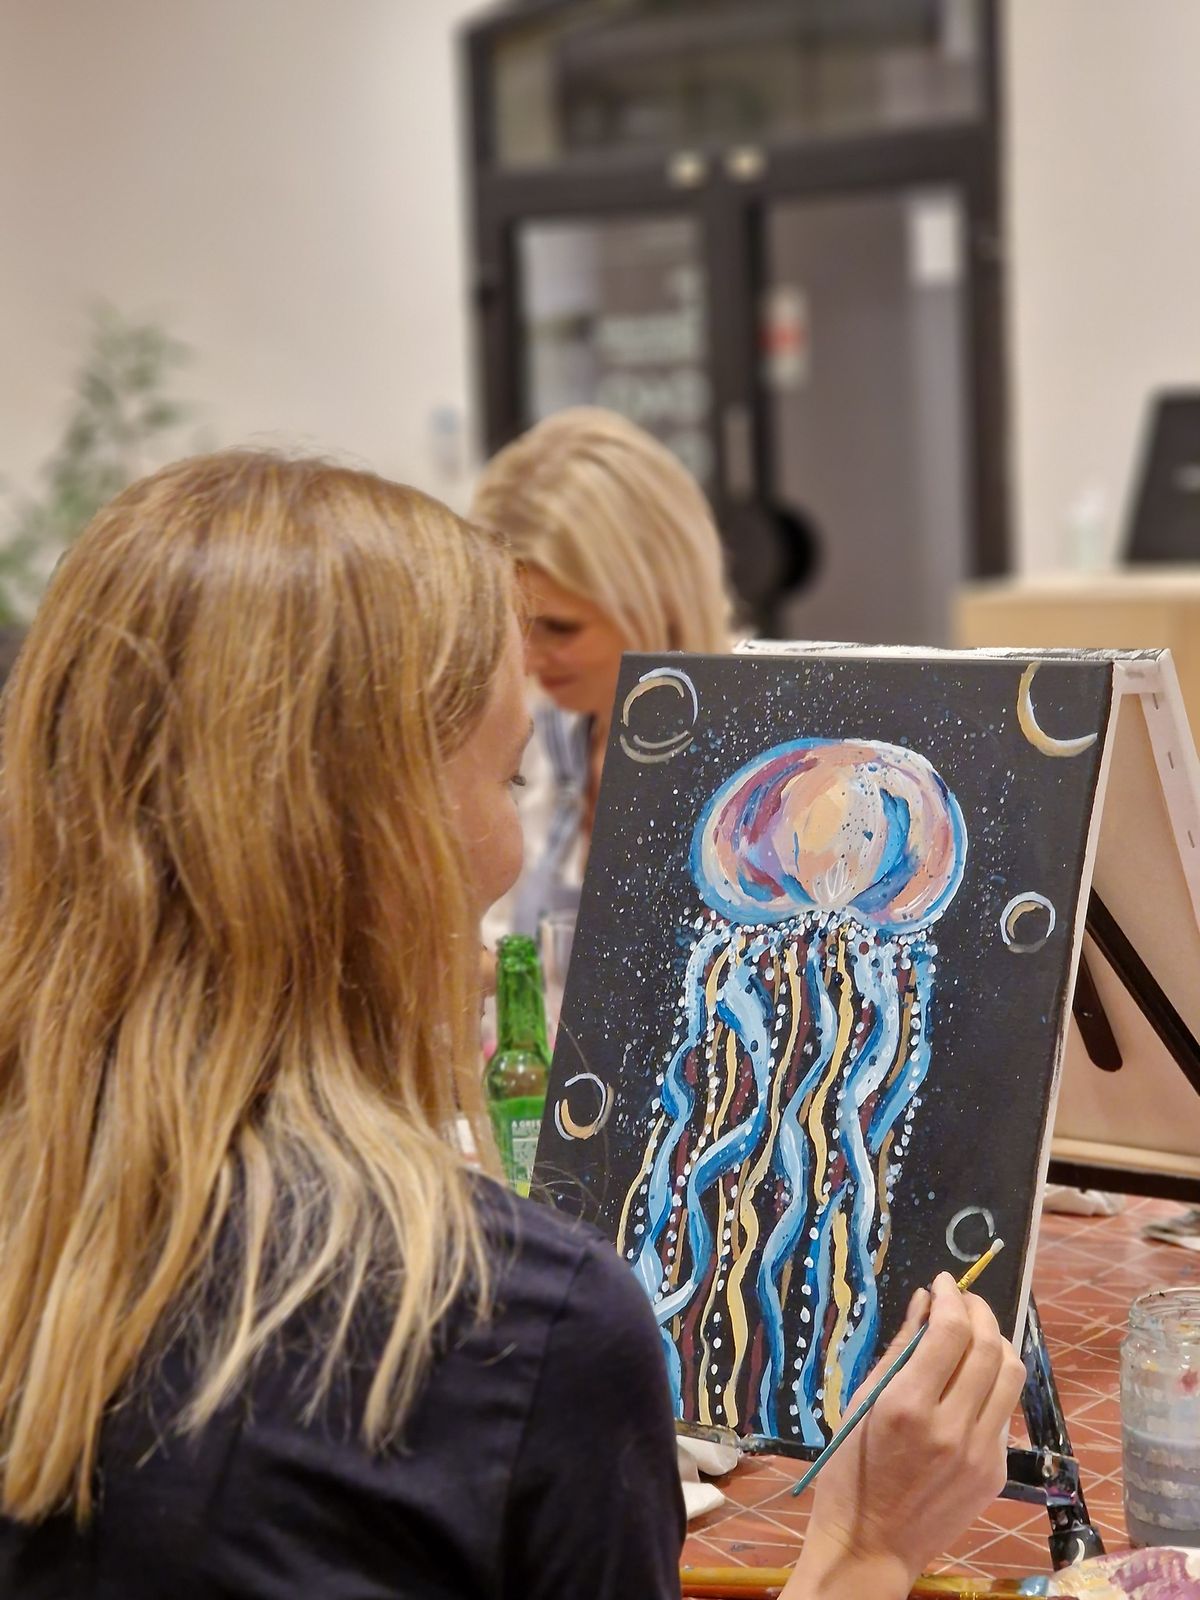 SIP AND CREATE: JELLYFISH PAINTING EVENT